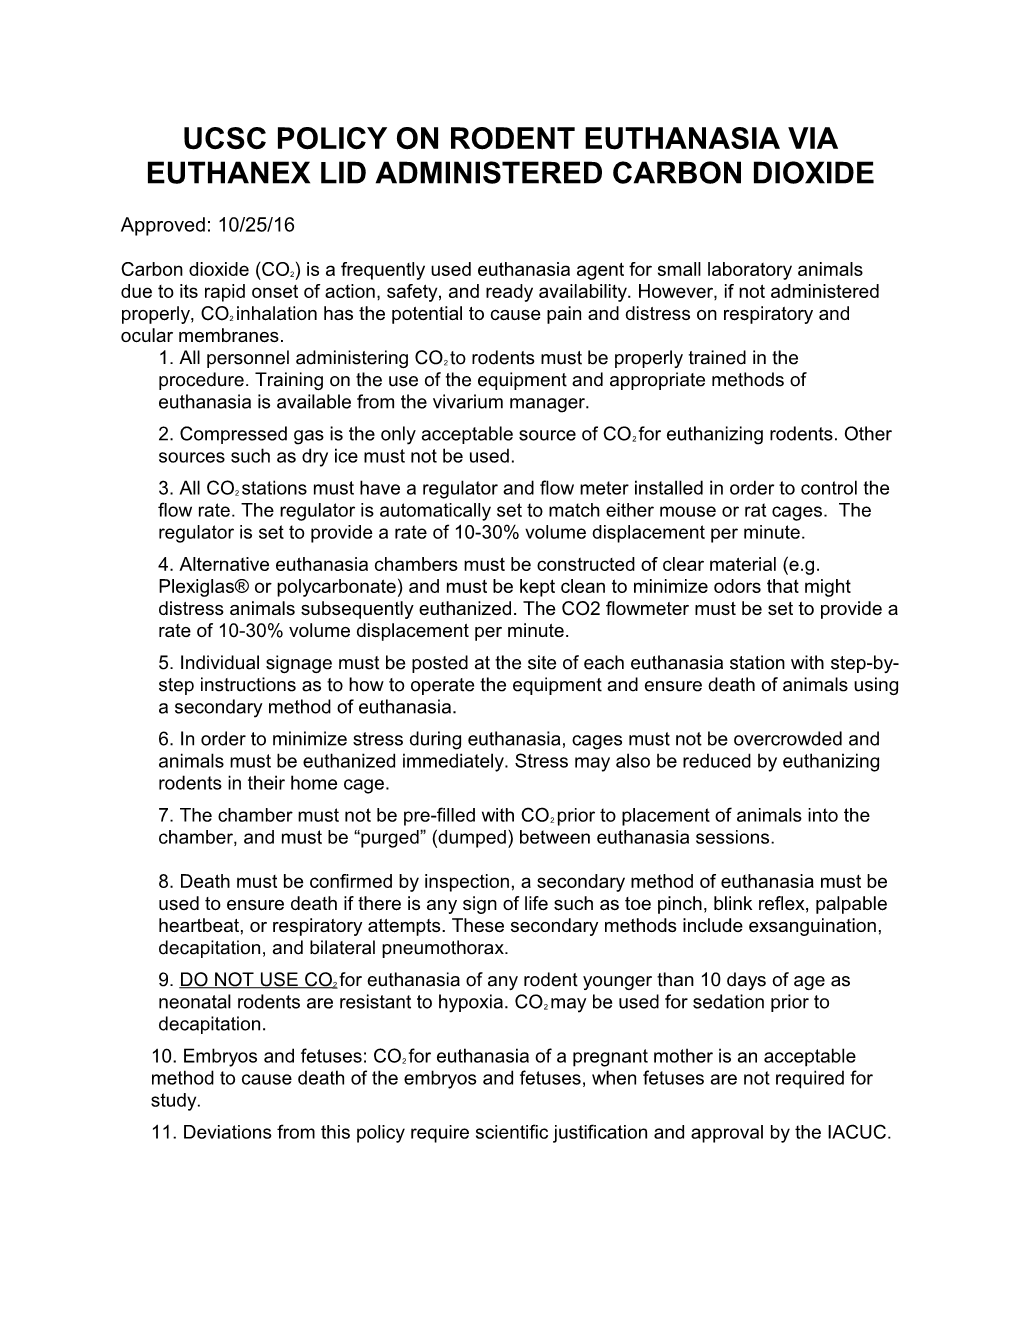 Ucsc Policy on Rodent Euthanasia Via Euthanex Lid Administered Carbon Dioxide